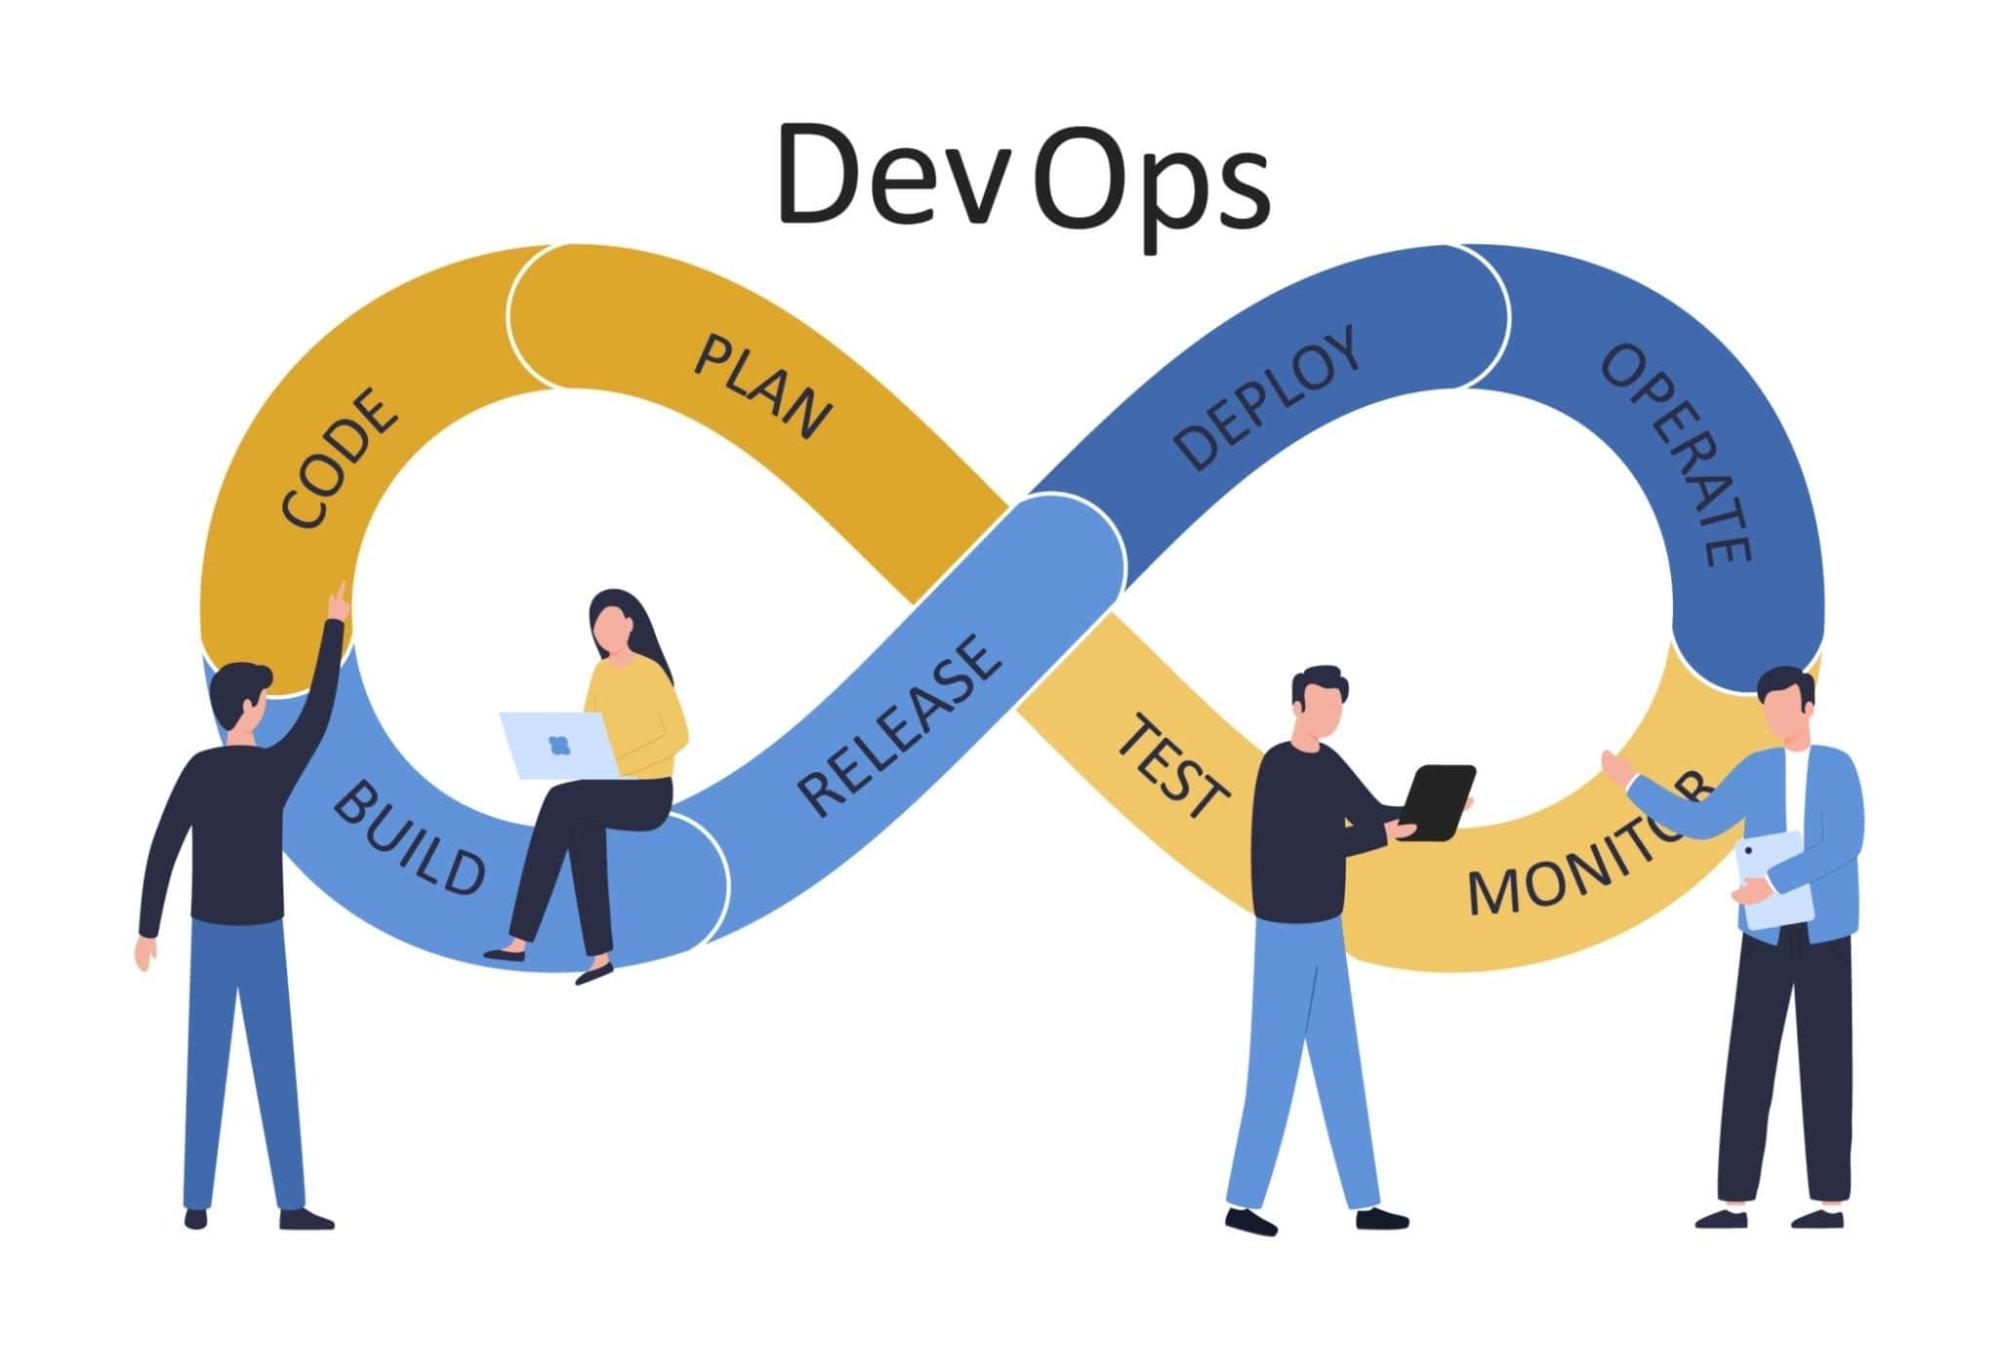 The DevOps software development life cycle